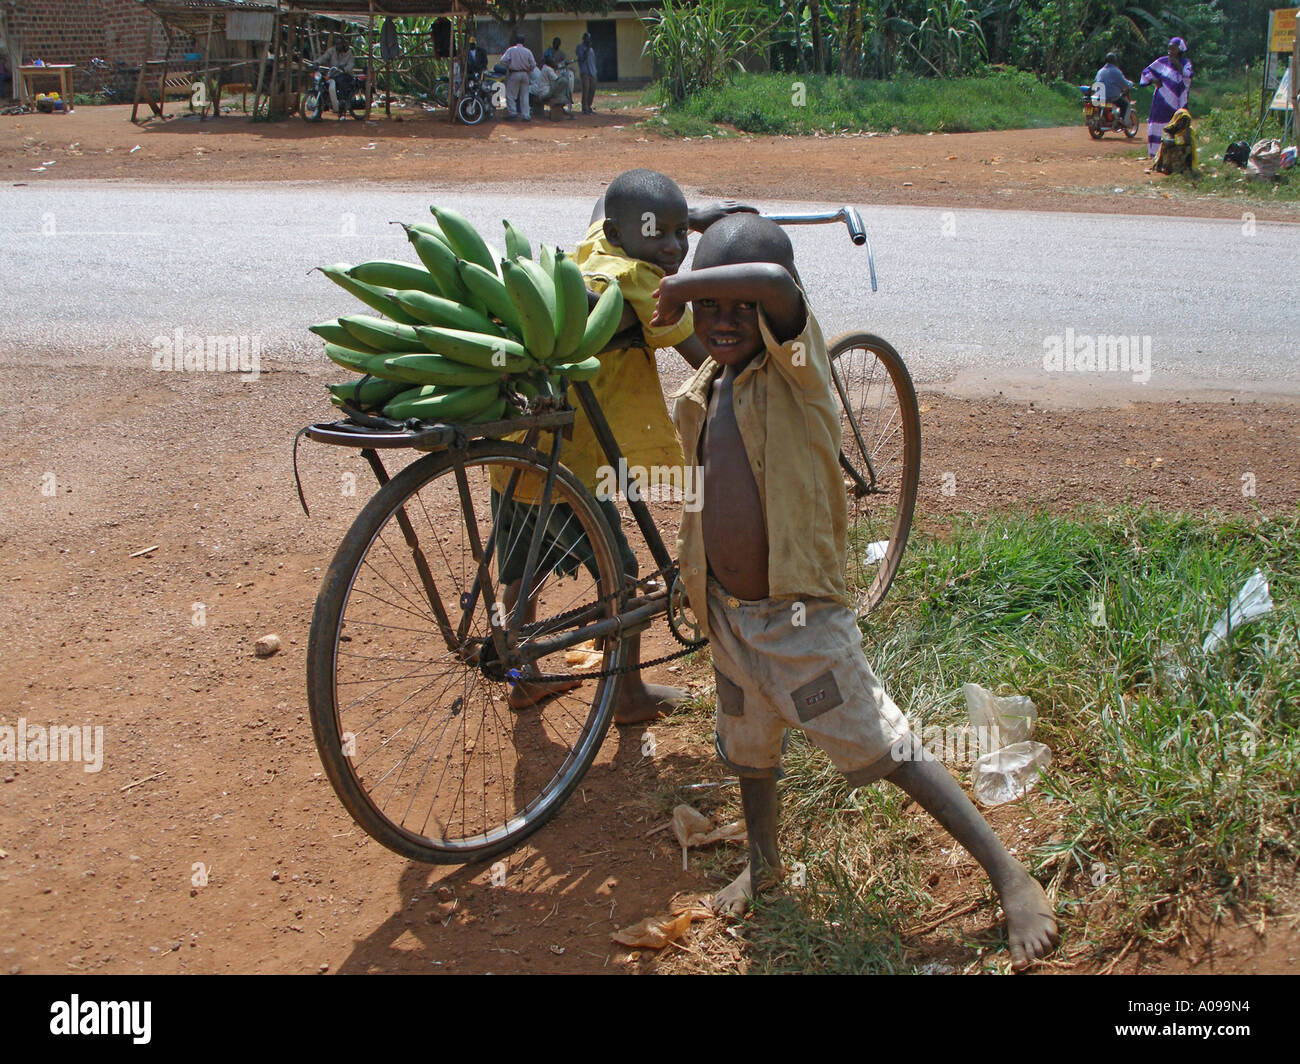 Young boys struggle with an adult sized bicycle carrying plantain Stock Photo